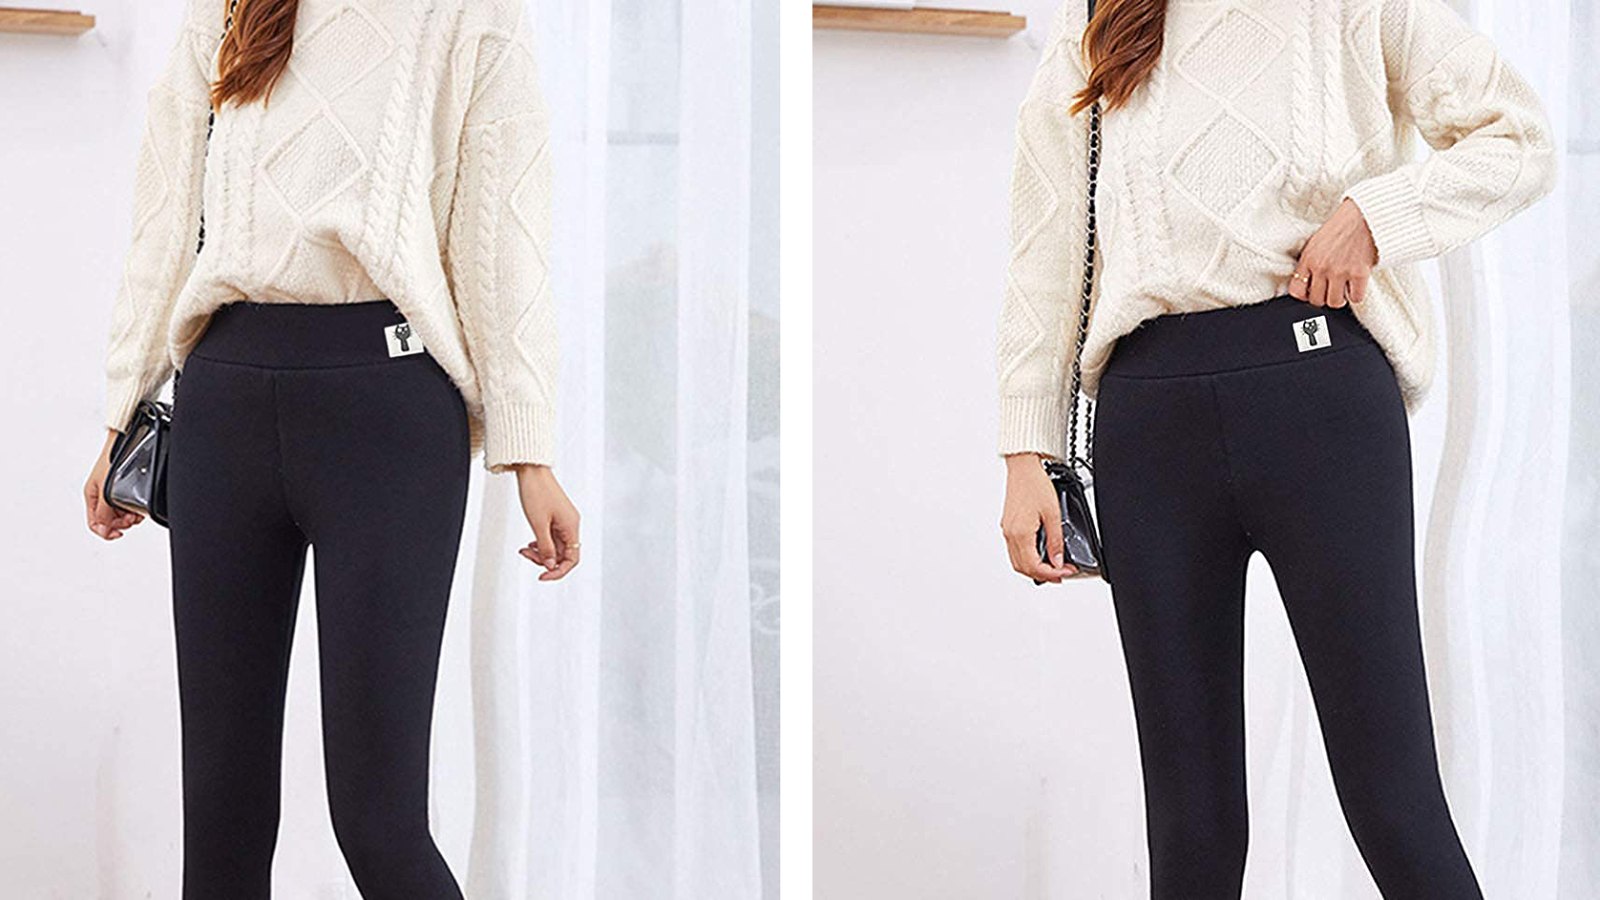 Sherpa-Lined Leggings Are Must-Haves for Freezing Weather